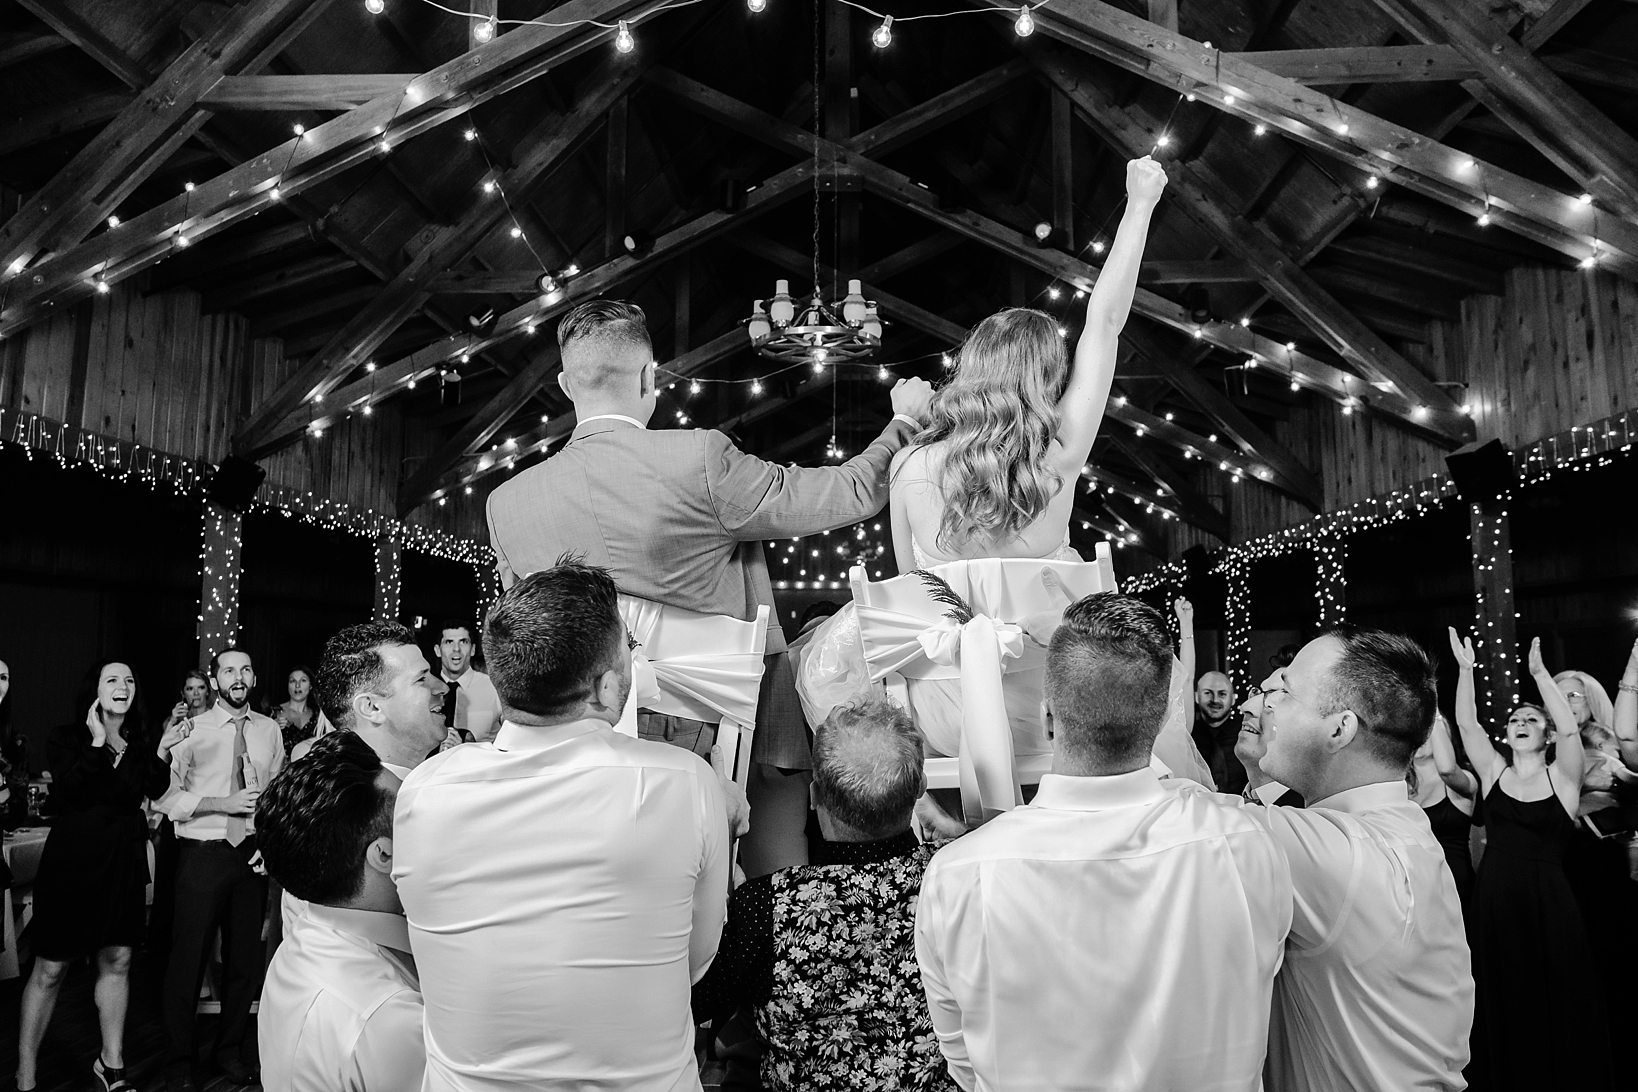 The Bride and Groom being lifted up during their wedding reception in chairs